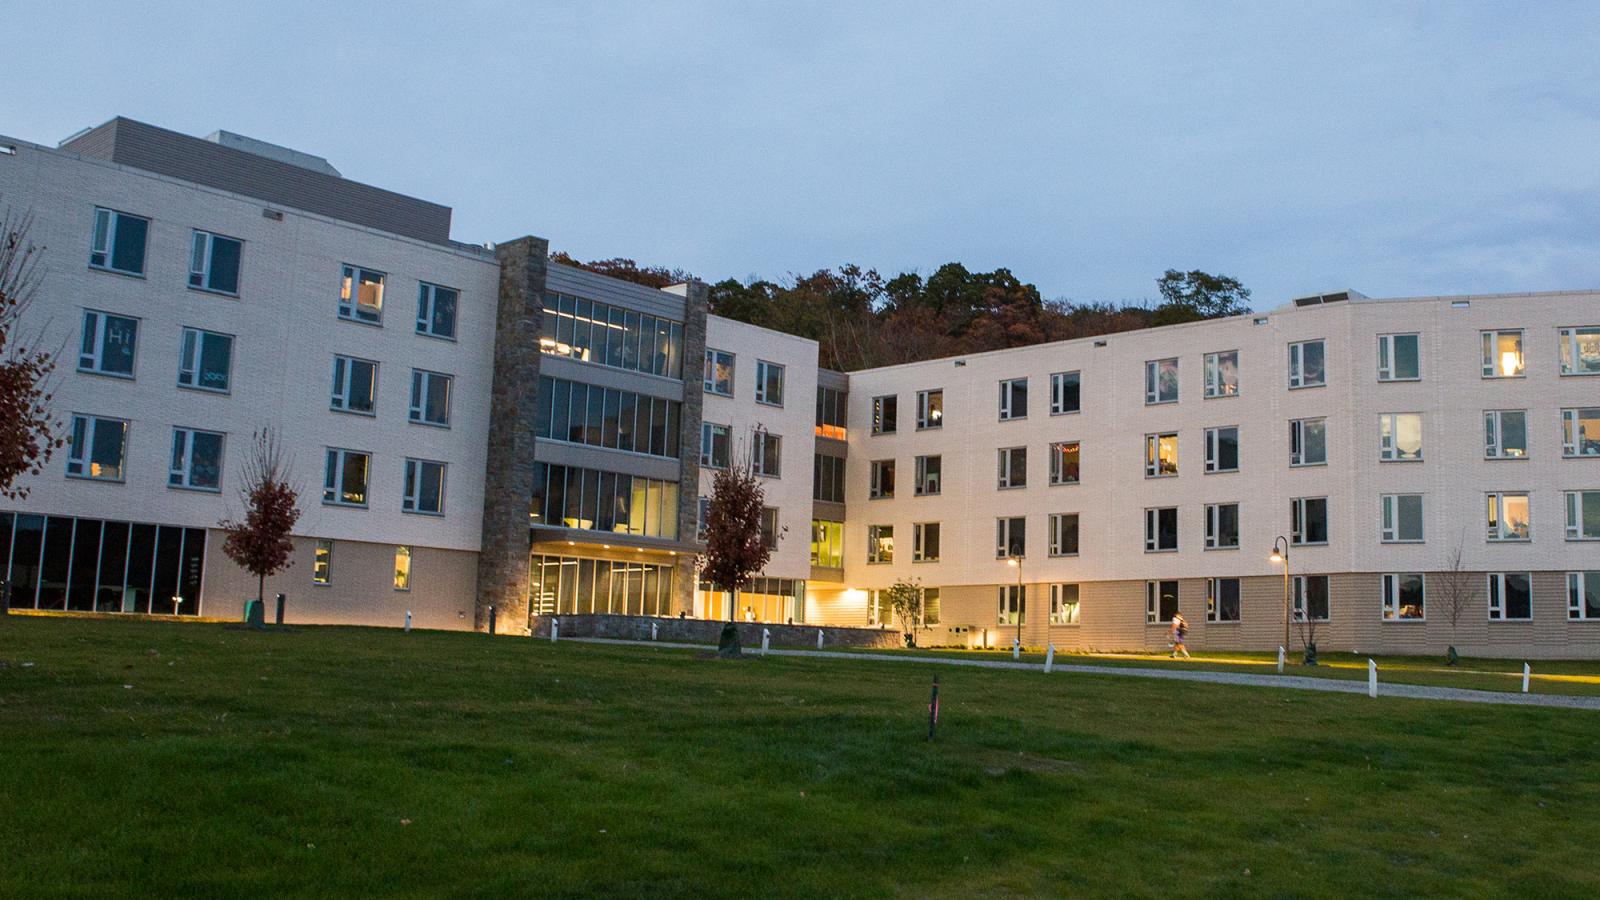 Image of one of the residential halls on the Westchester campus.